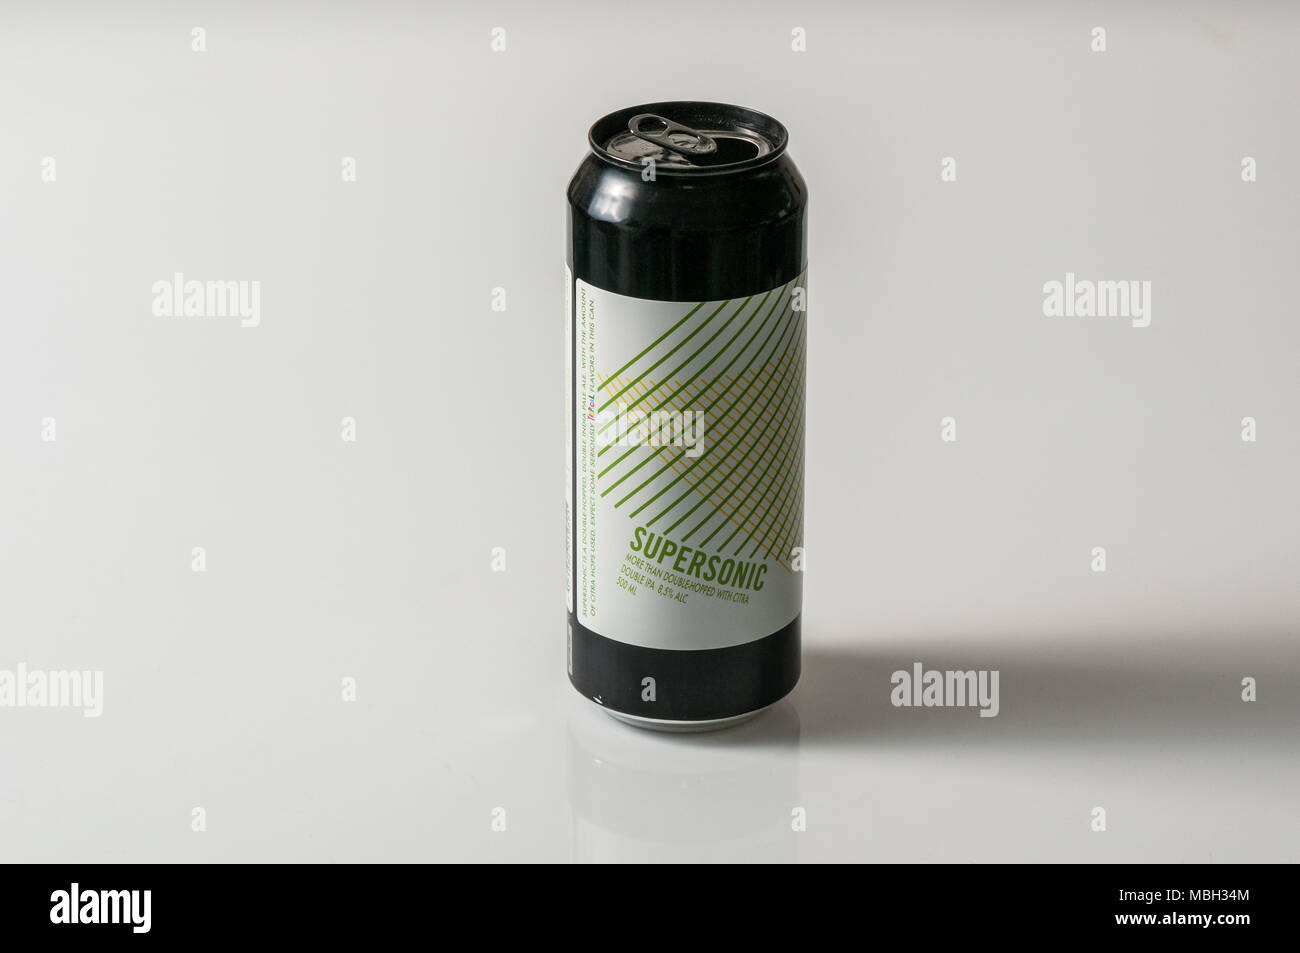 supersonic double ipa beer can, LERVIG brewery Stock Photo